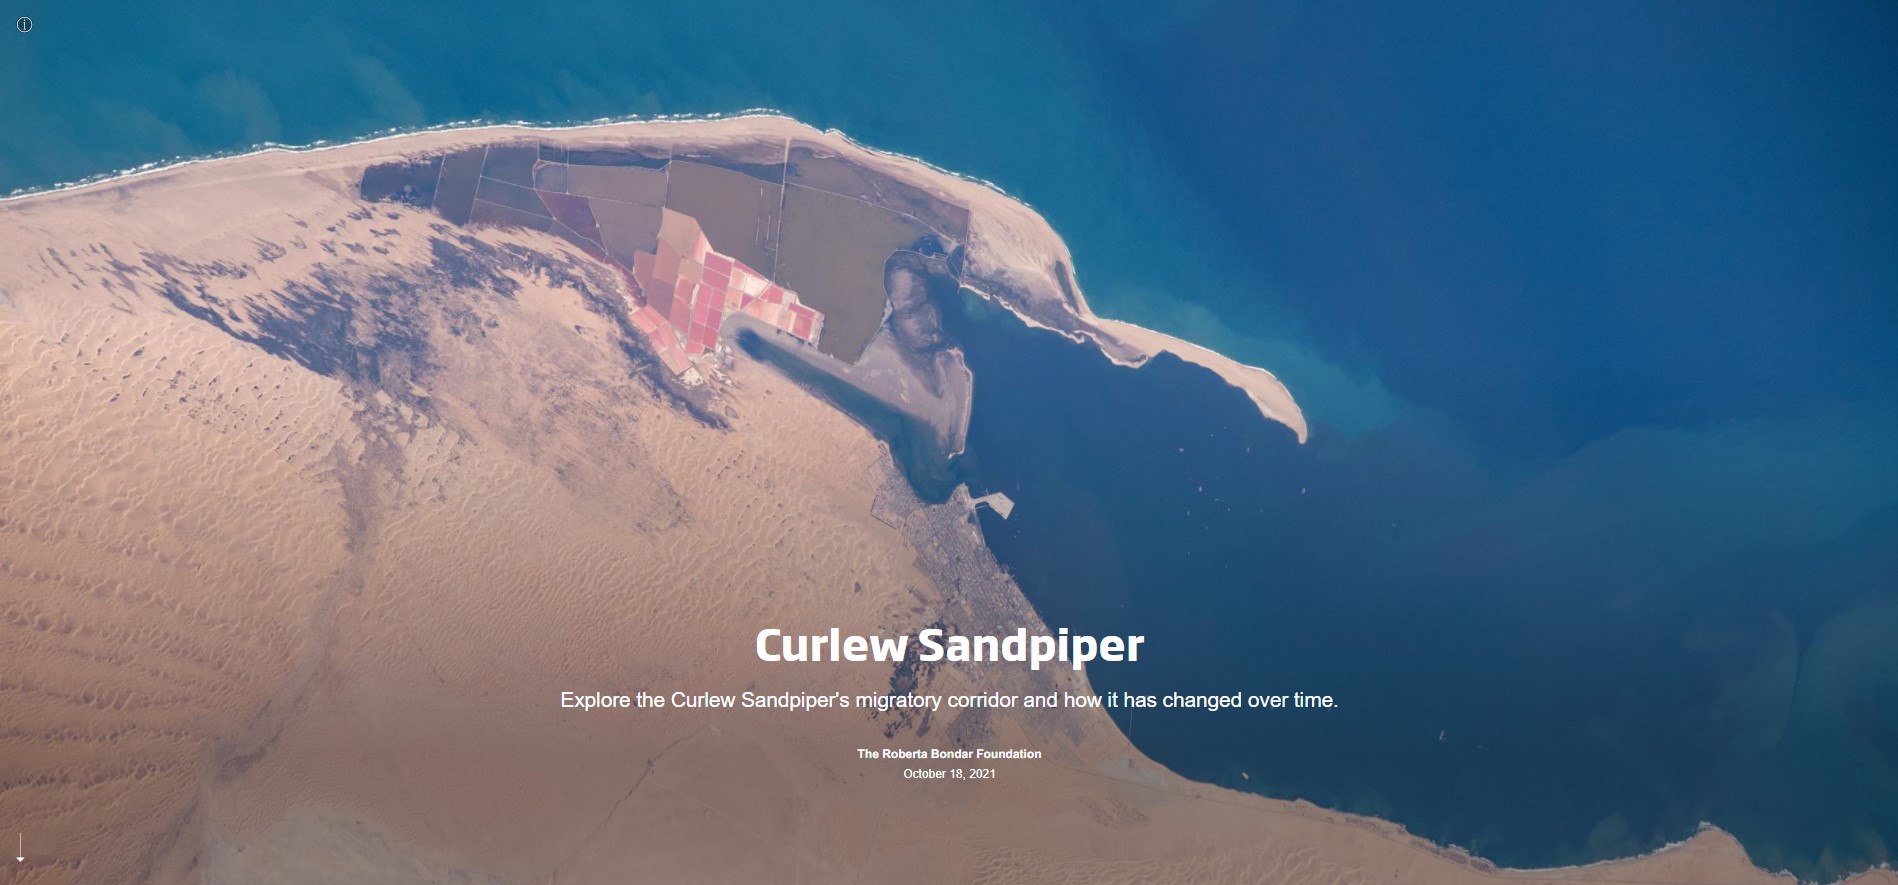 Slide with the text Curlew Sandpiper with a space image of pink sand dunes beside blue ocean